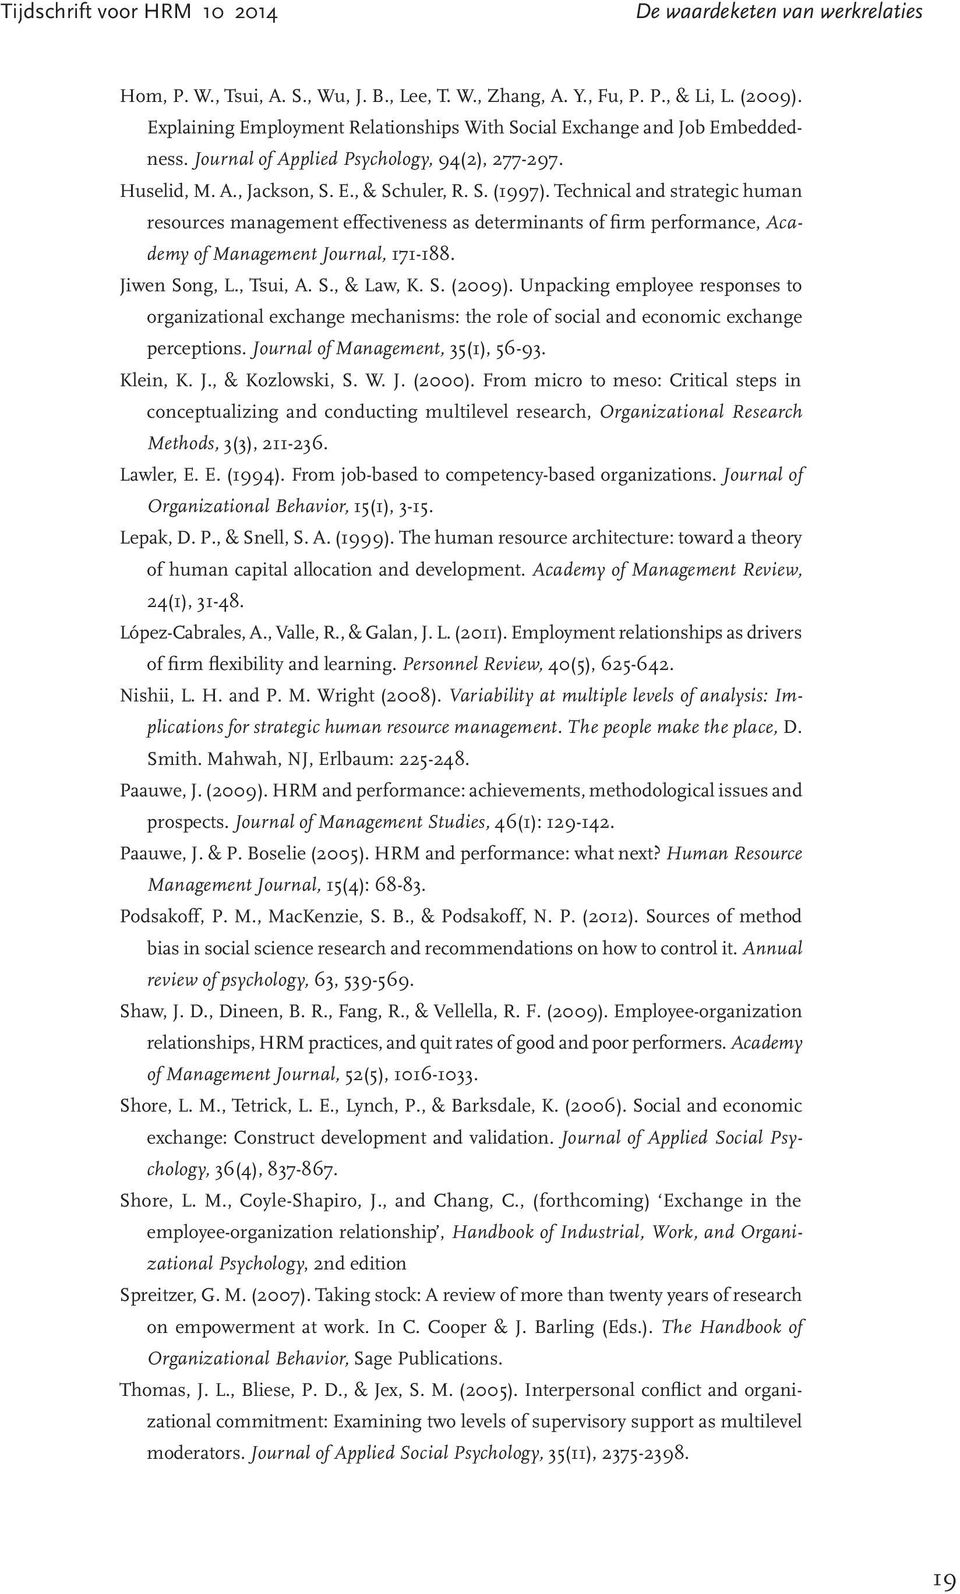 Technical and strategic human resources management effectiveness as determinants of firm performance, Academy of Management Journal, 171-188. Jiwen Song, L., Tsui, A. S., & Law, K. S. (2009).